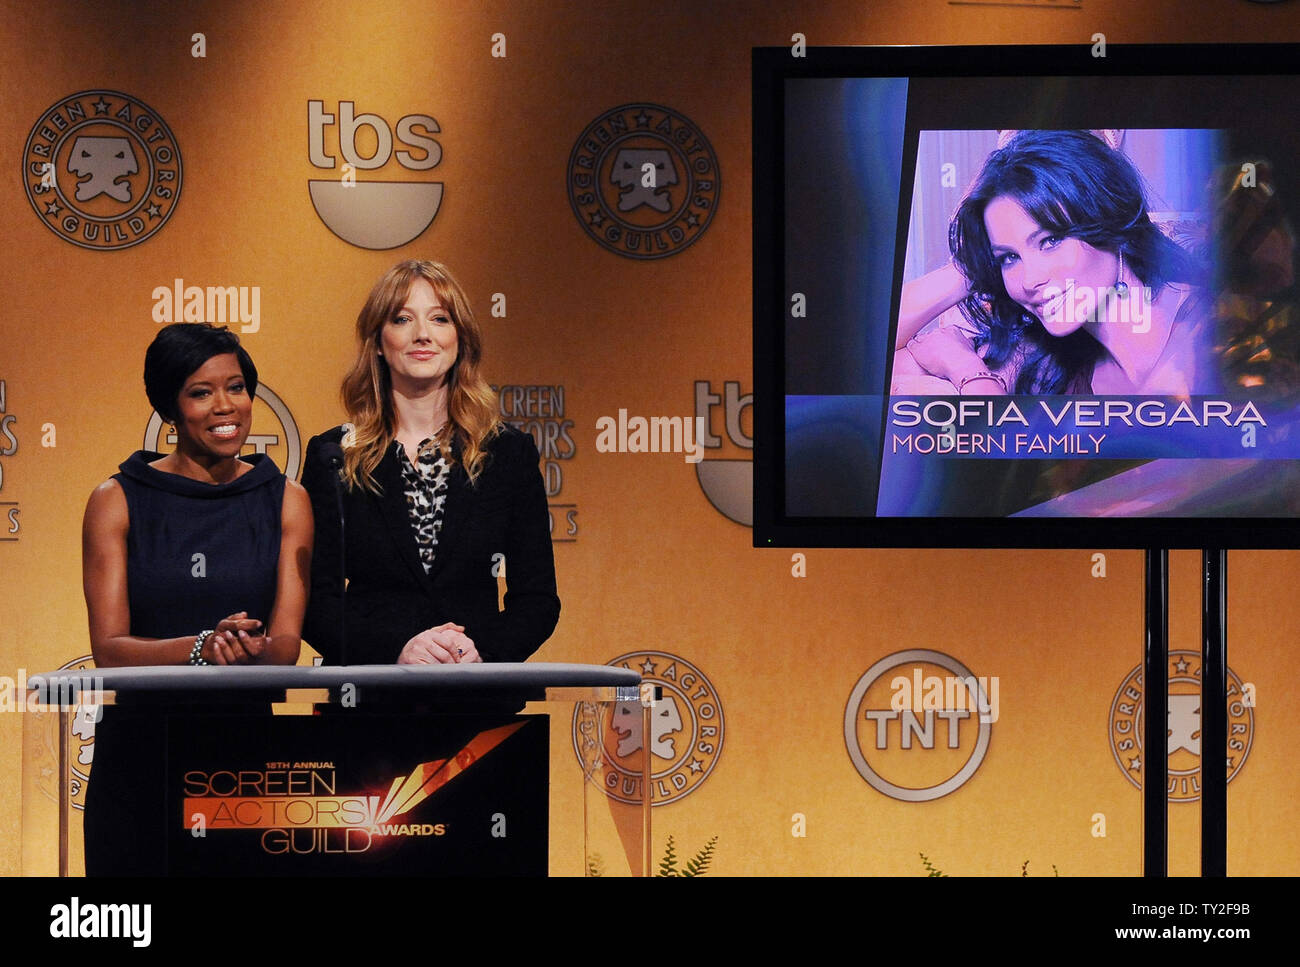 Actresses Regina King (L) and Judy Greer announce nominations for the 18th annual Screen Actors Guild Awards in West Hollywood, California on December 14, 2011. Sofia Vergara was nominated for outstanding performance by a female actor in a comedy series for 'Modern Family'. The SAG Awards will be held in Los Angeles on January 29, 2011. UPI/Jim Ruymen Stock Photo